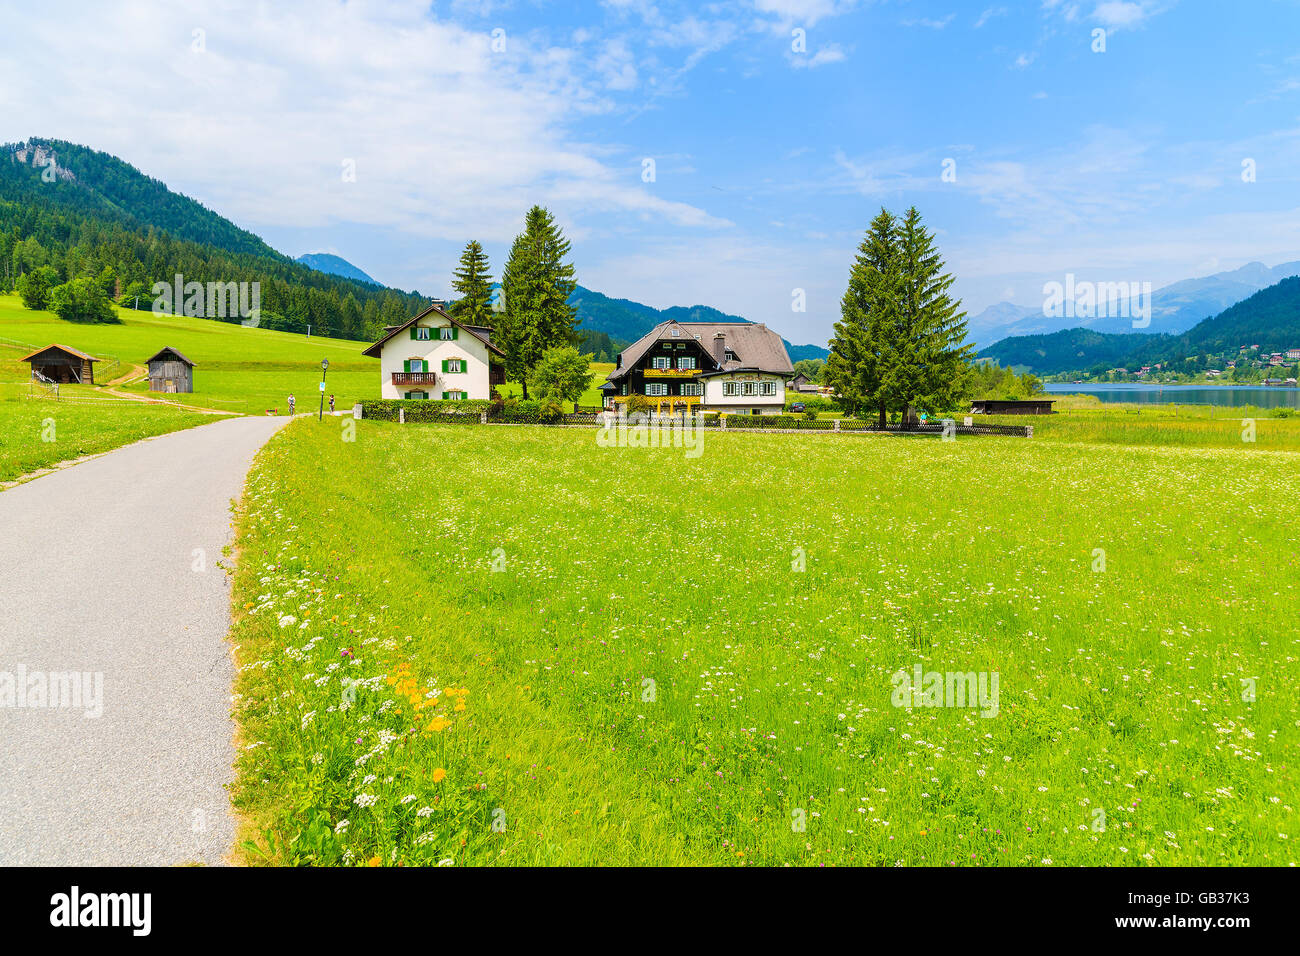 Road along green meadow with typical alpine houses in distance in summer landscape of Weissensee lake, Austria Stock Photo